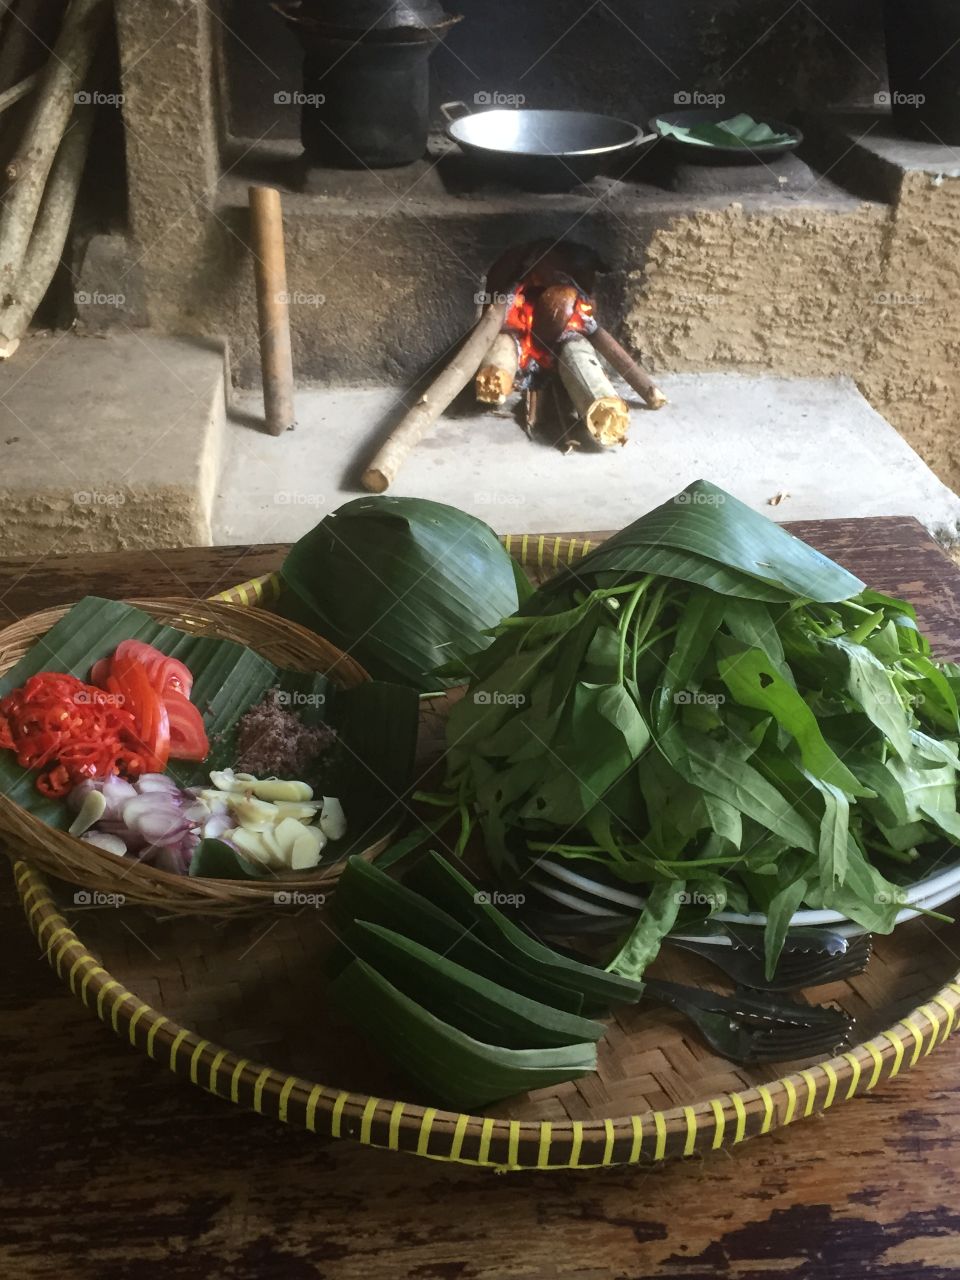 Cooking in Bali